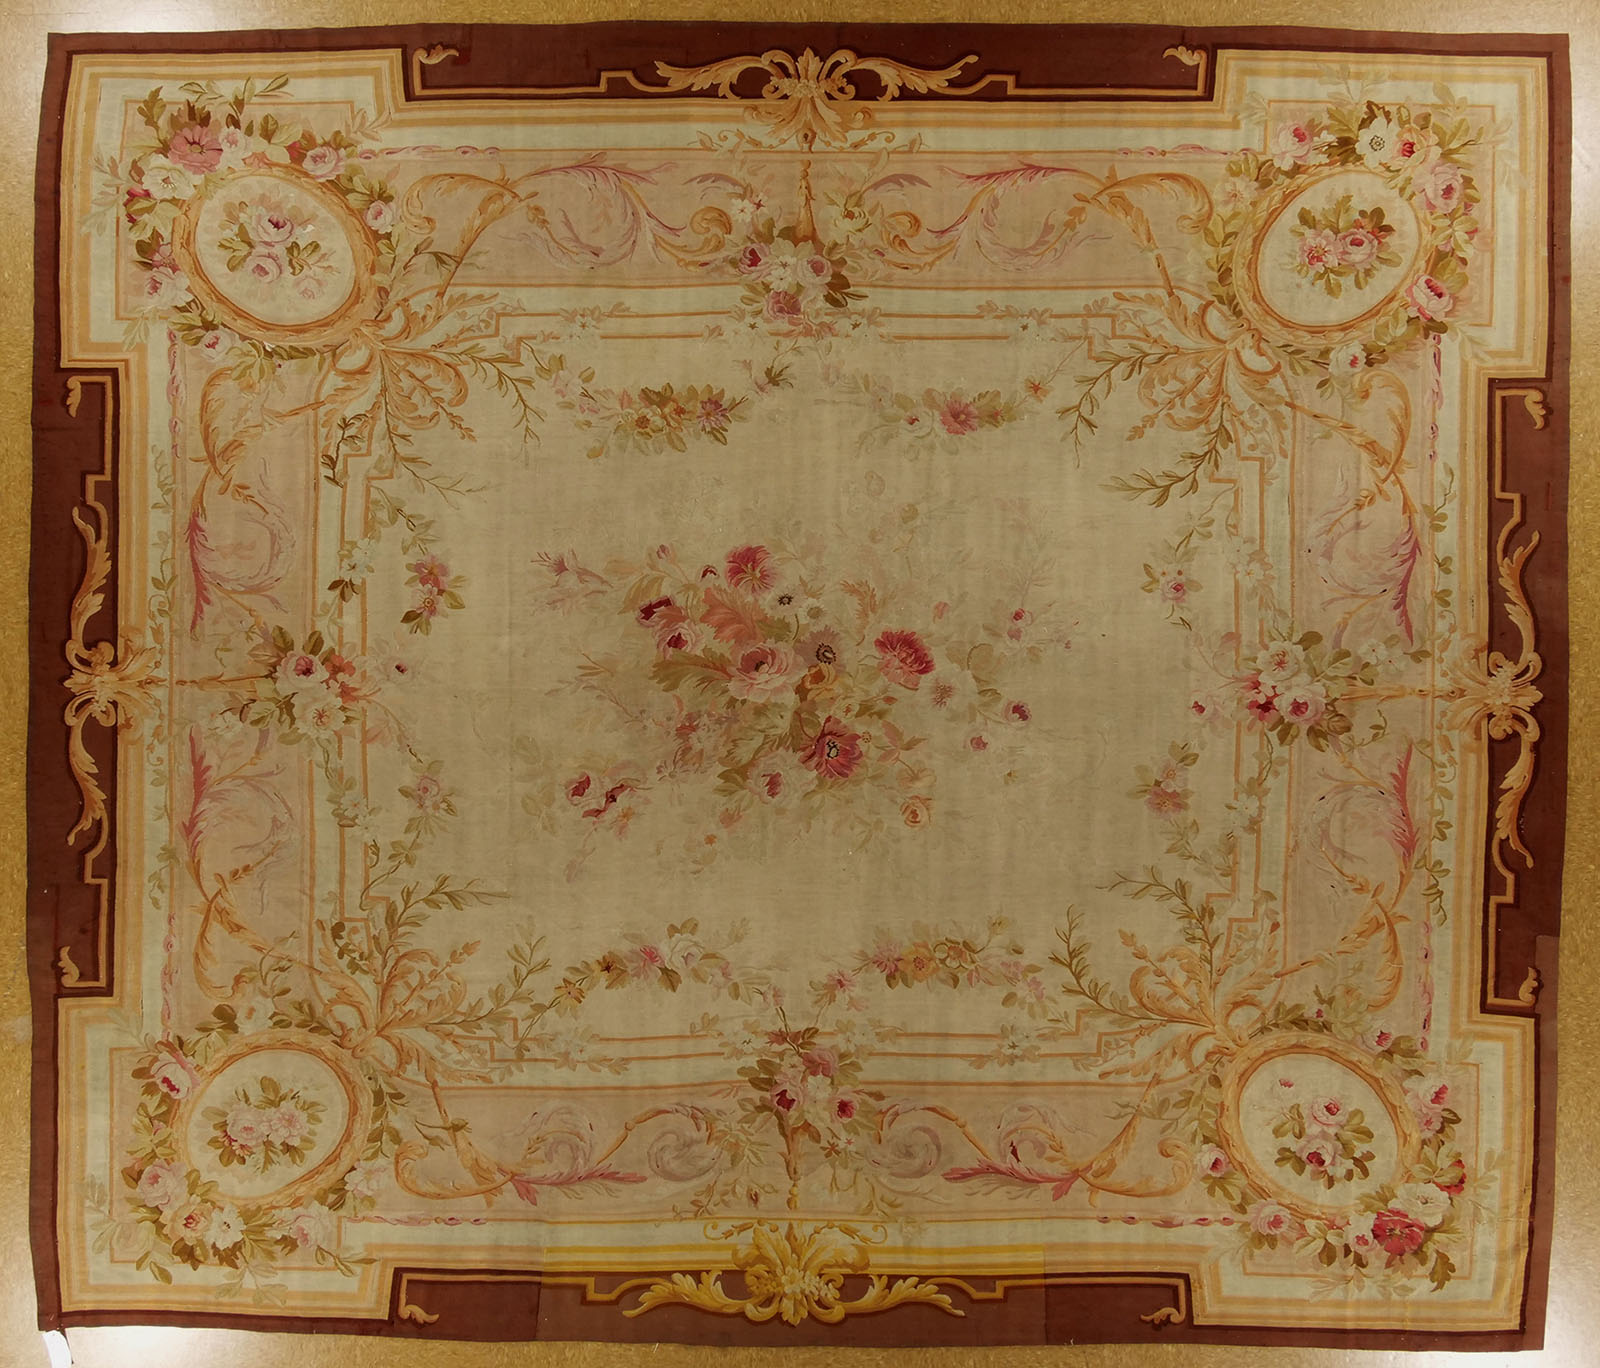 ModRen Rugs Inc Aubusson Savonnerie Tapestry | Photo 9 of 10 | Address: 3901 Liberty Ave Suite 10, North Bergen, NJ 07047, United States | Phone: (201) 866-0909